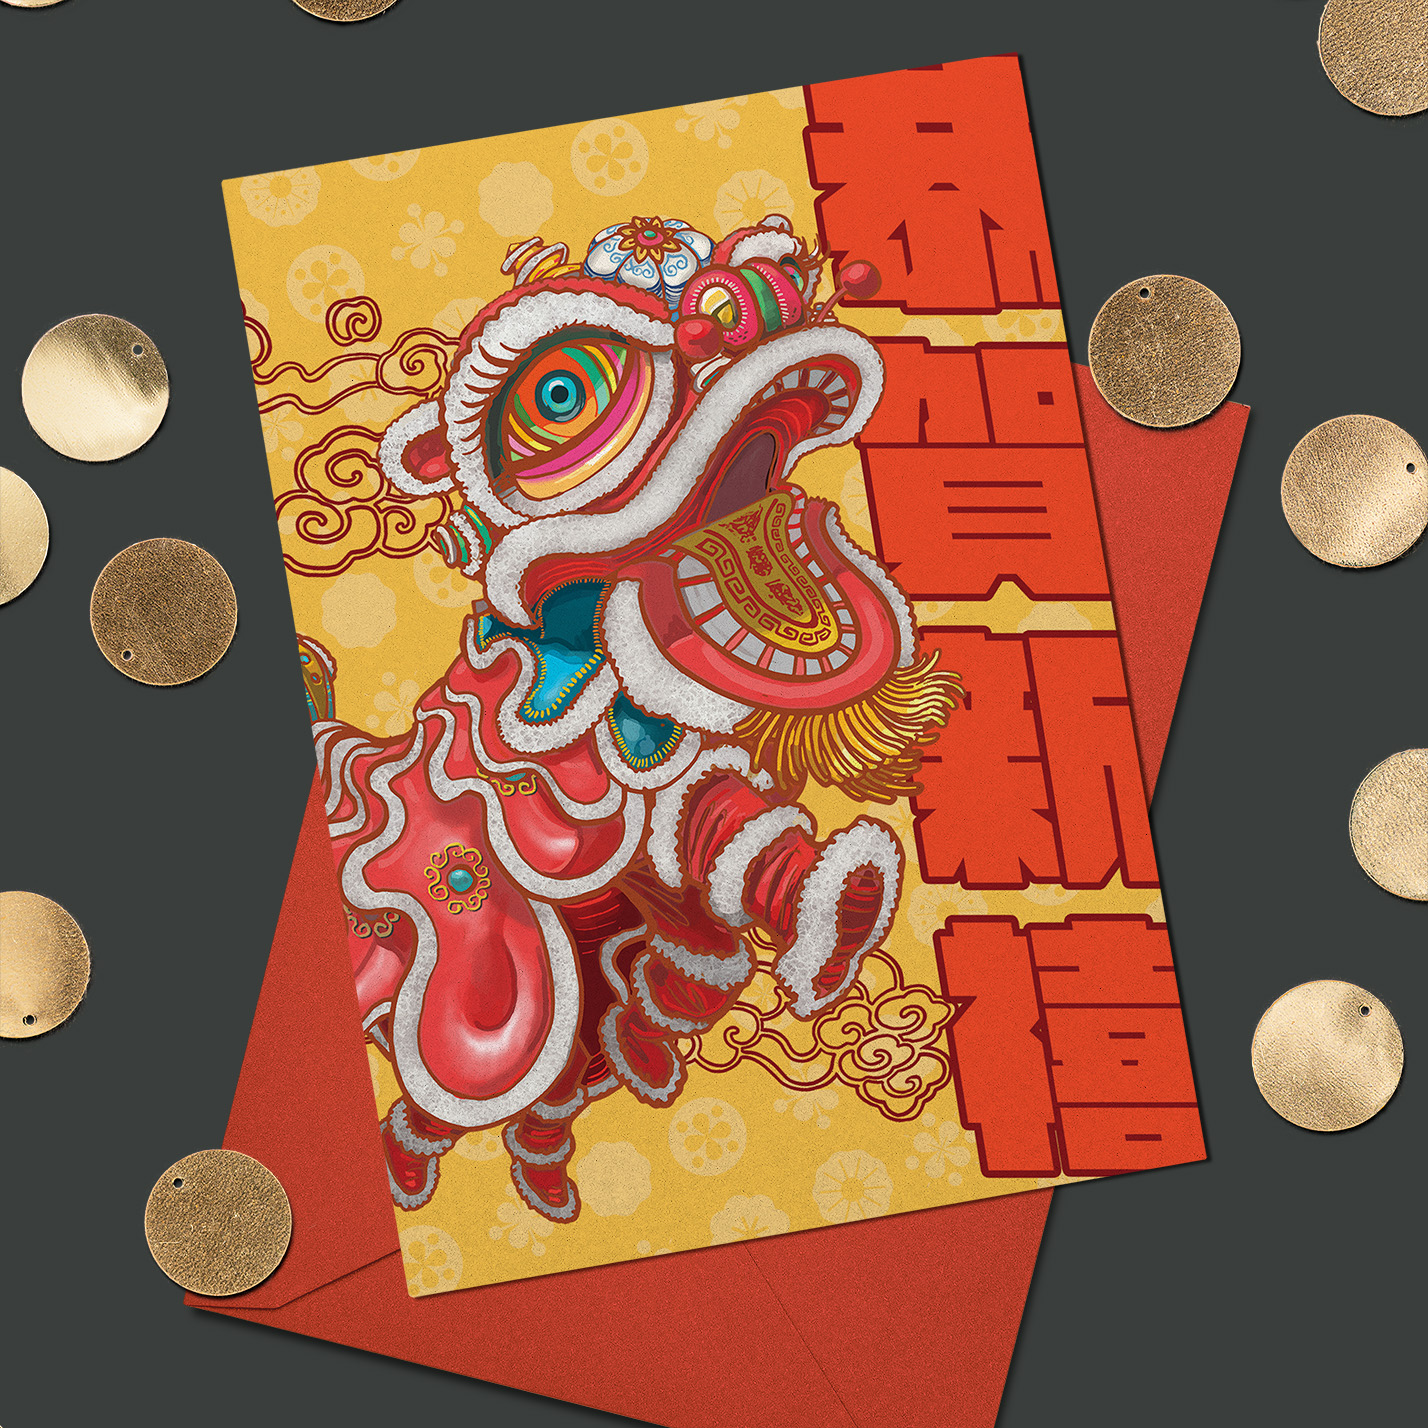 A Lunar New Year greeting card featuring an illustration of a traditional 'dancing lion'. The text is set in bright, bold red and the background is a festive gold. The card is mocked up against a gray background and a scattering of gold paper 'coins'.